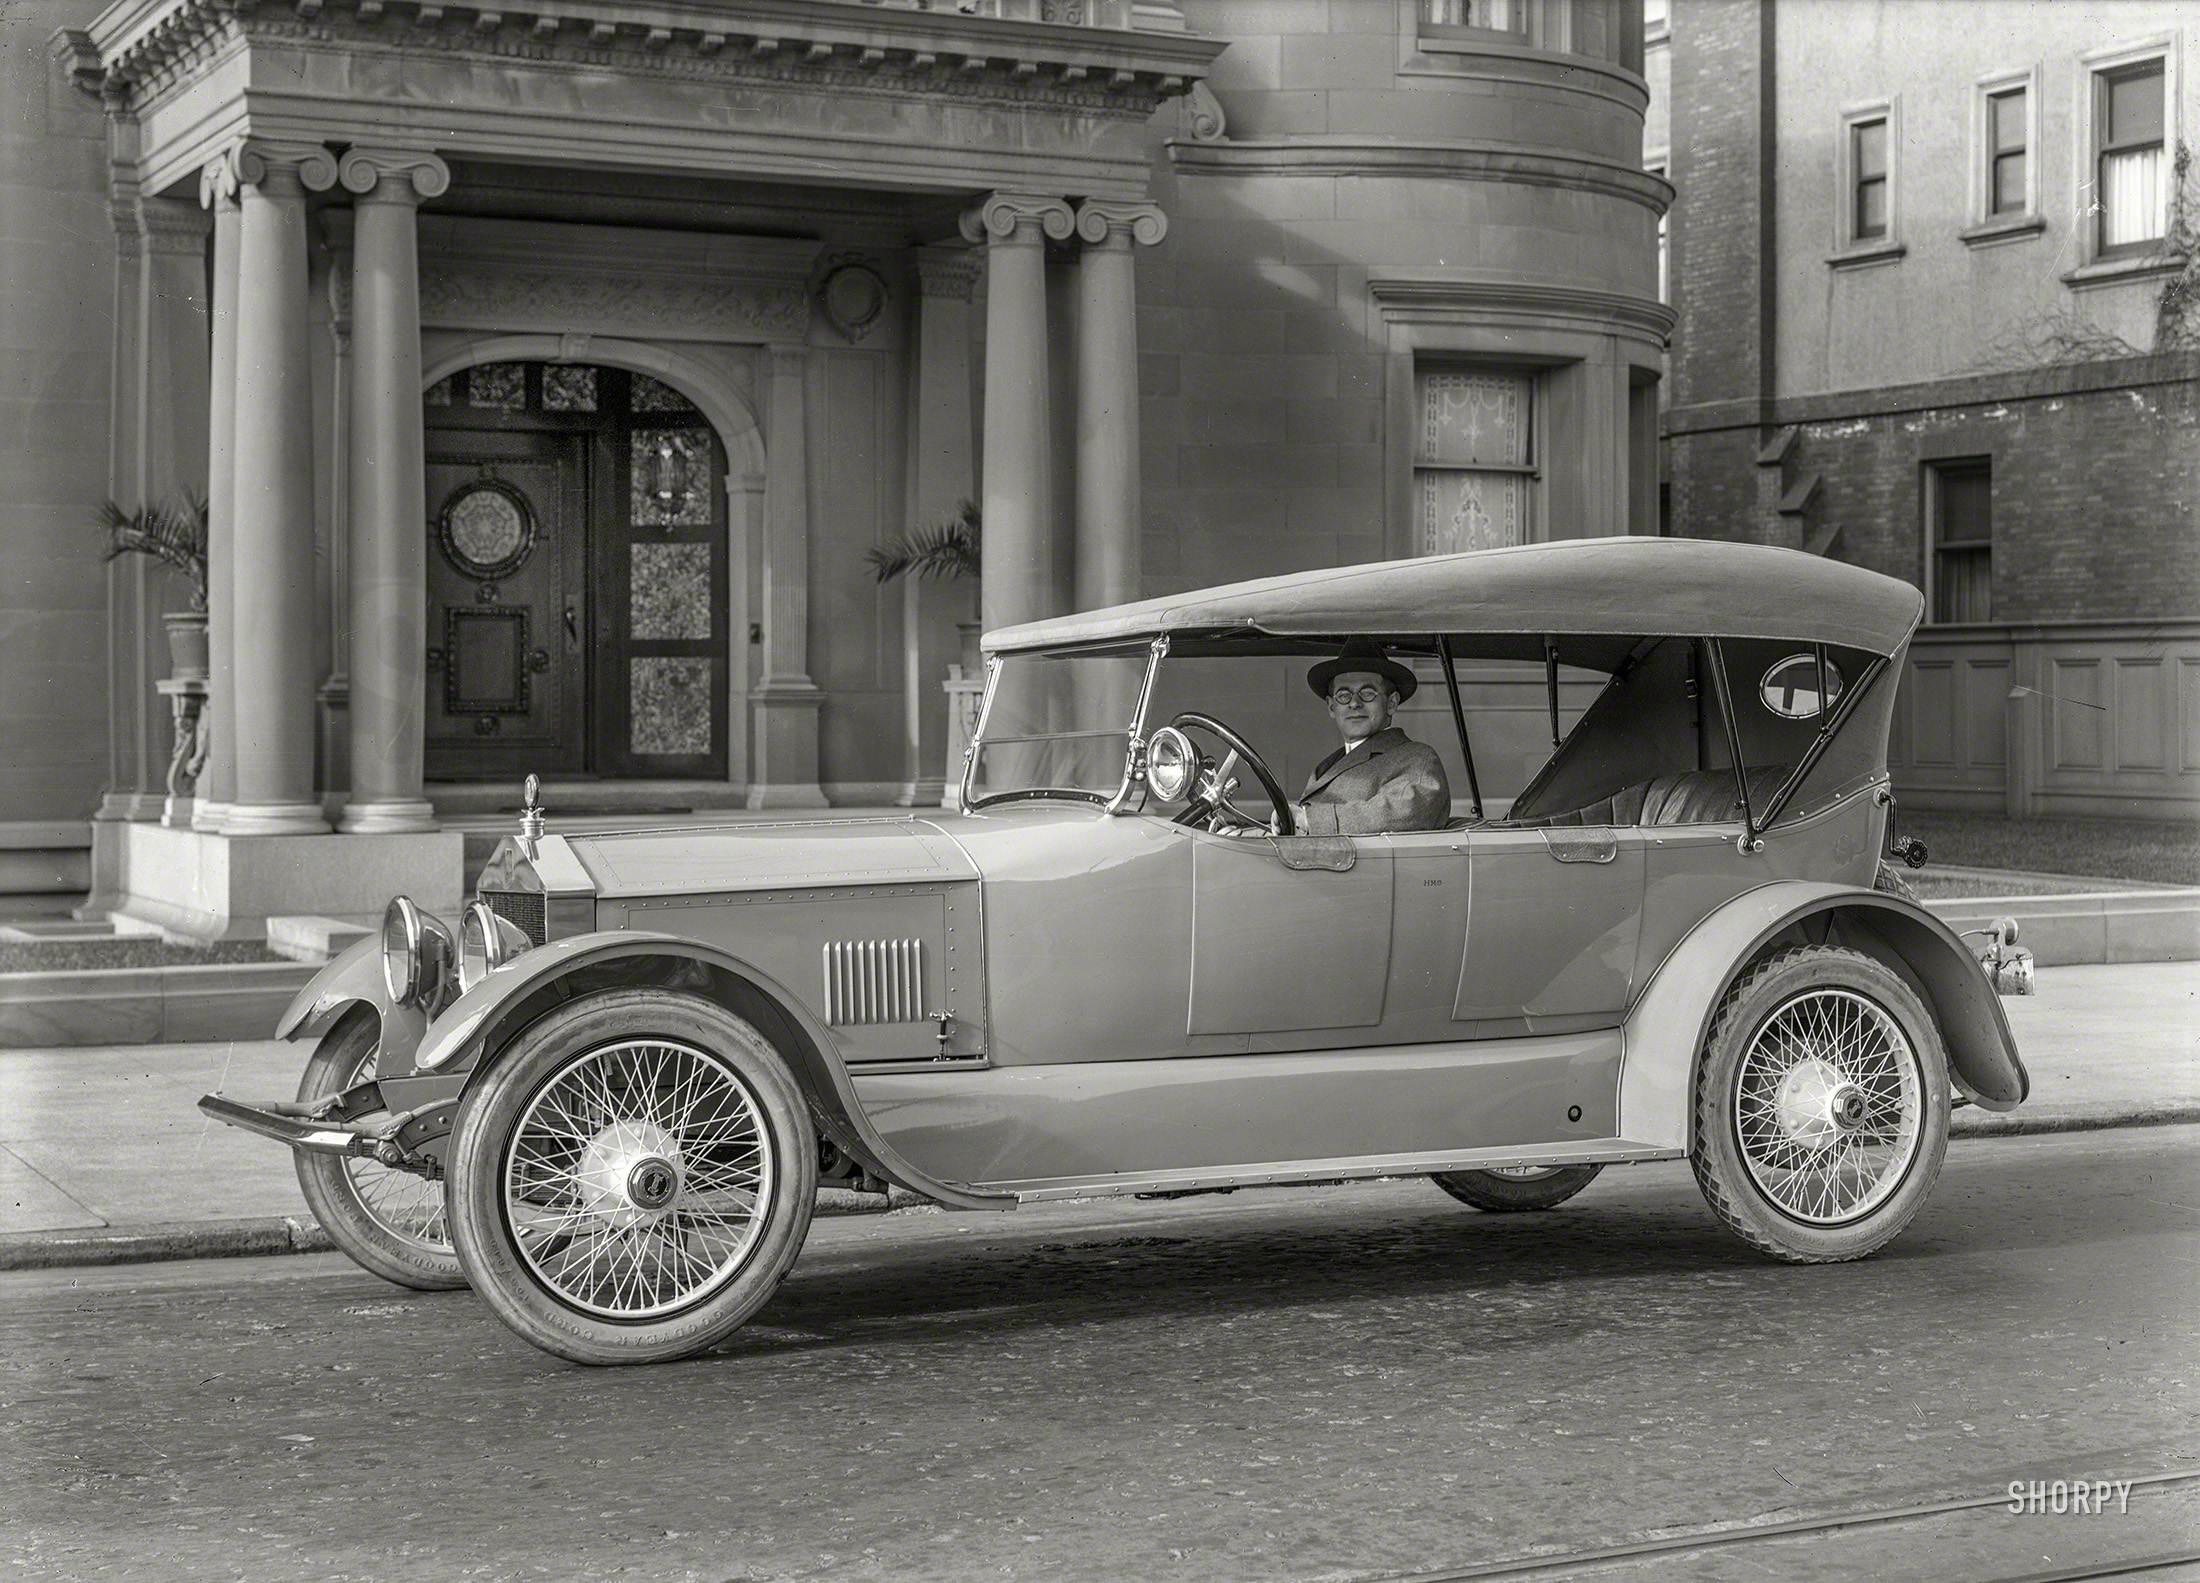 San Francisco circa 1919. "Roamer touring car at Historical Society (Whittier Mansion)." Our second Roamer in a row. 5x7 glass negative. View full size.